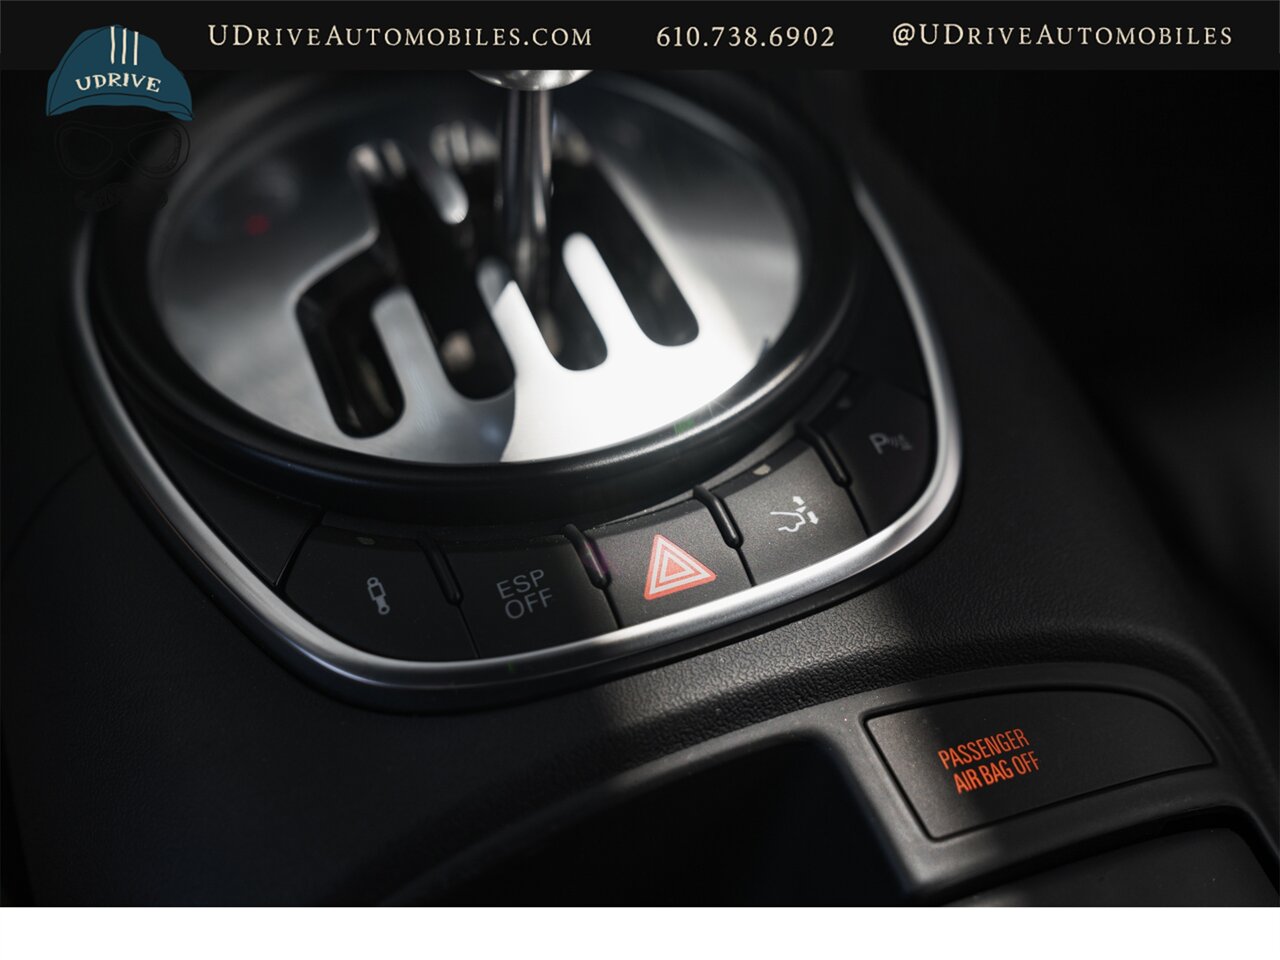 2009 Audi R8 Quattro  4.2L V8 6 Speed Manual - Photo 44 - West Chester, PA 19382